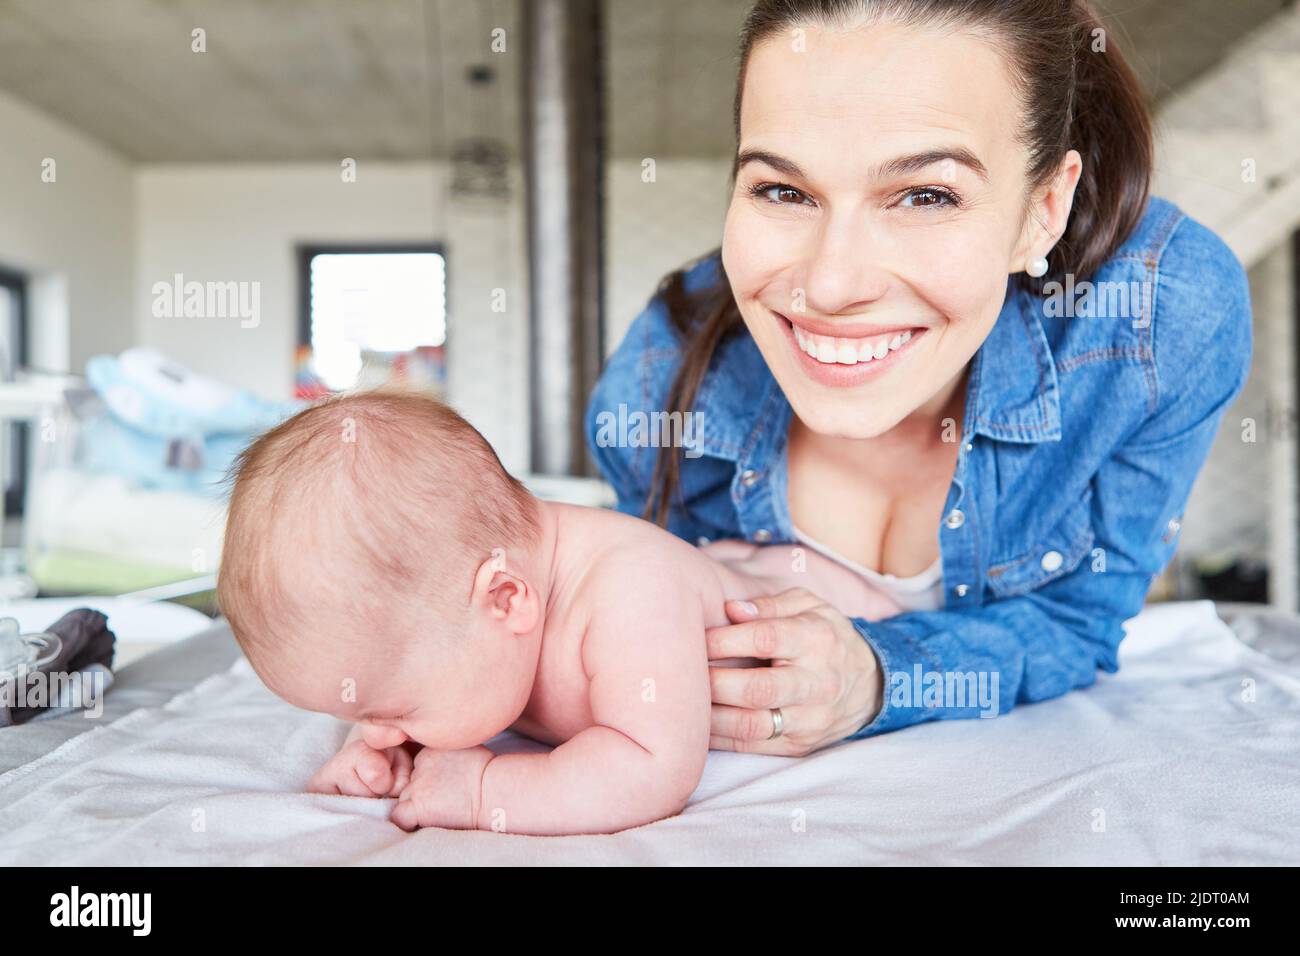 Happy smiling mother and her newborn baby on the changing table in the living room Stock Photo